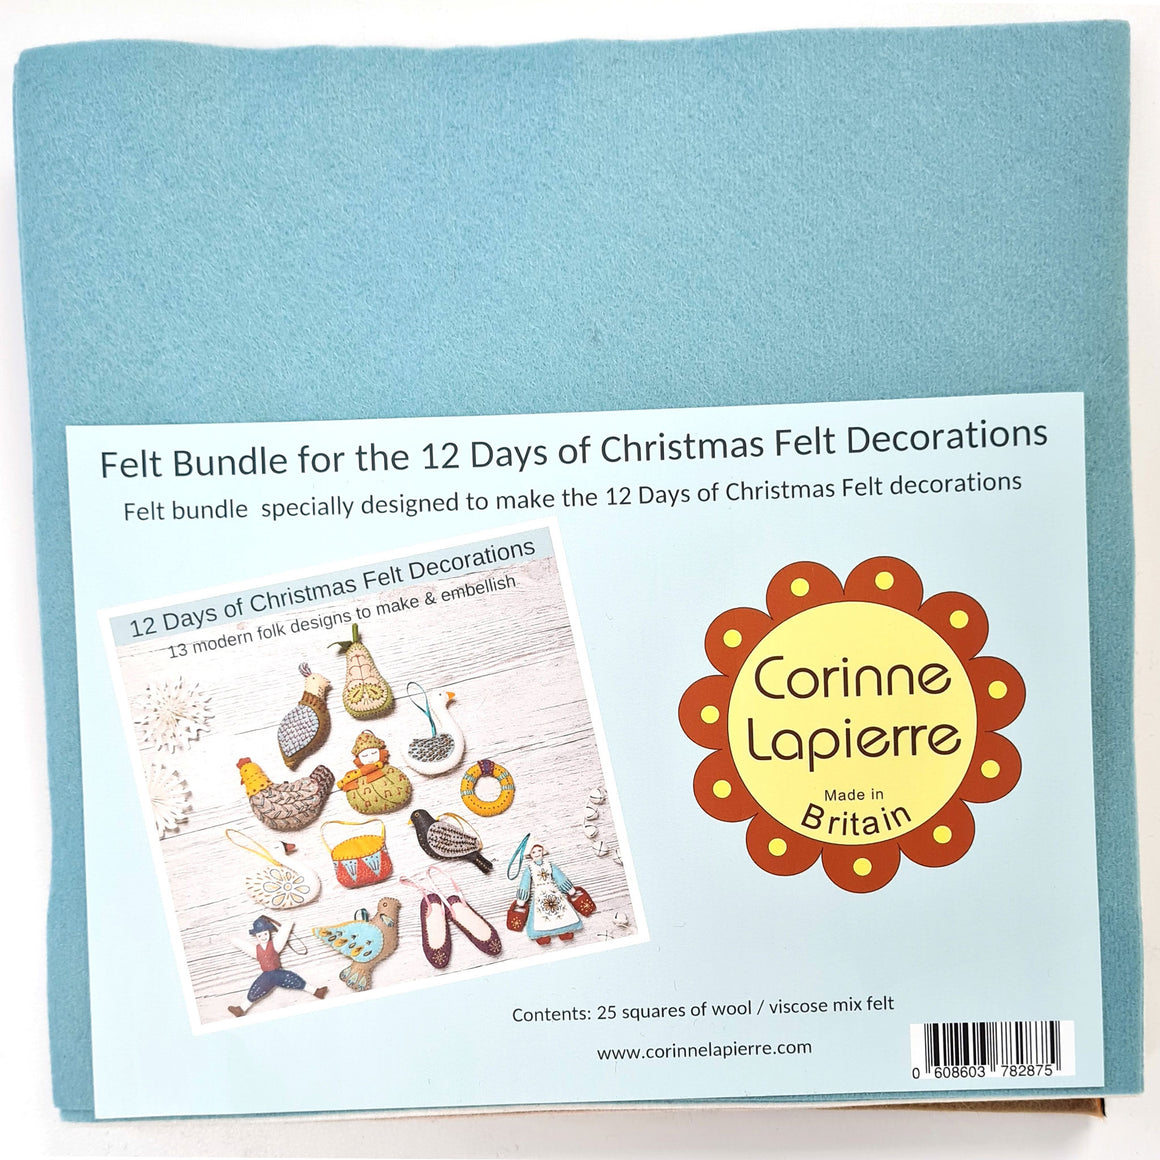 Corinne Lapierre Felt Bundle for 12 Days of Christmas Book. Image, pack of felt with light blue label and Corinne Lapierre logo.